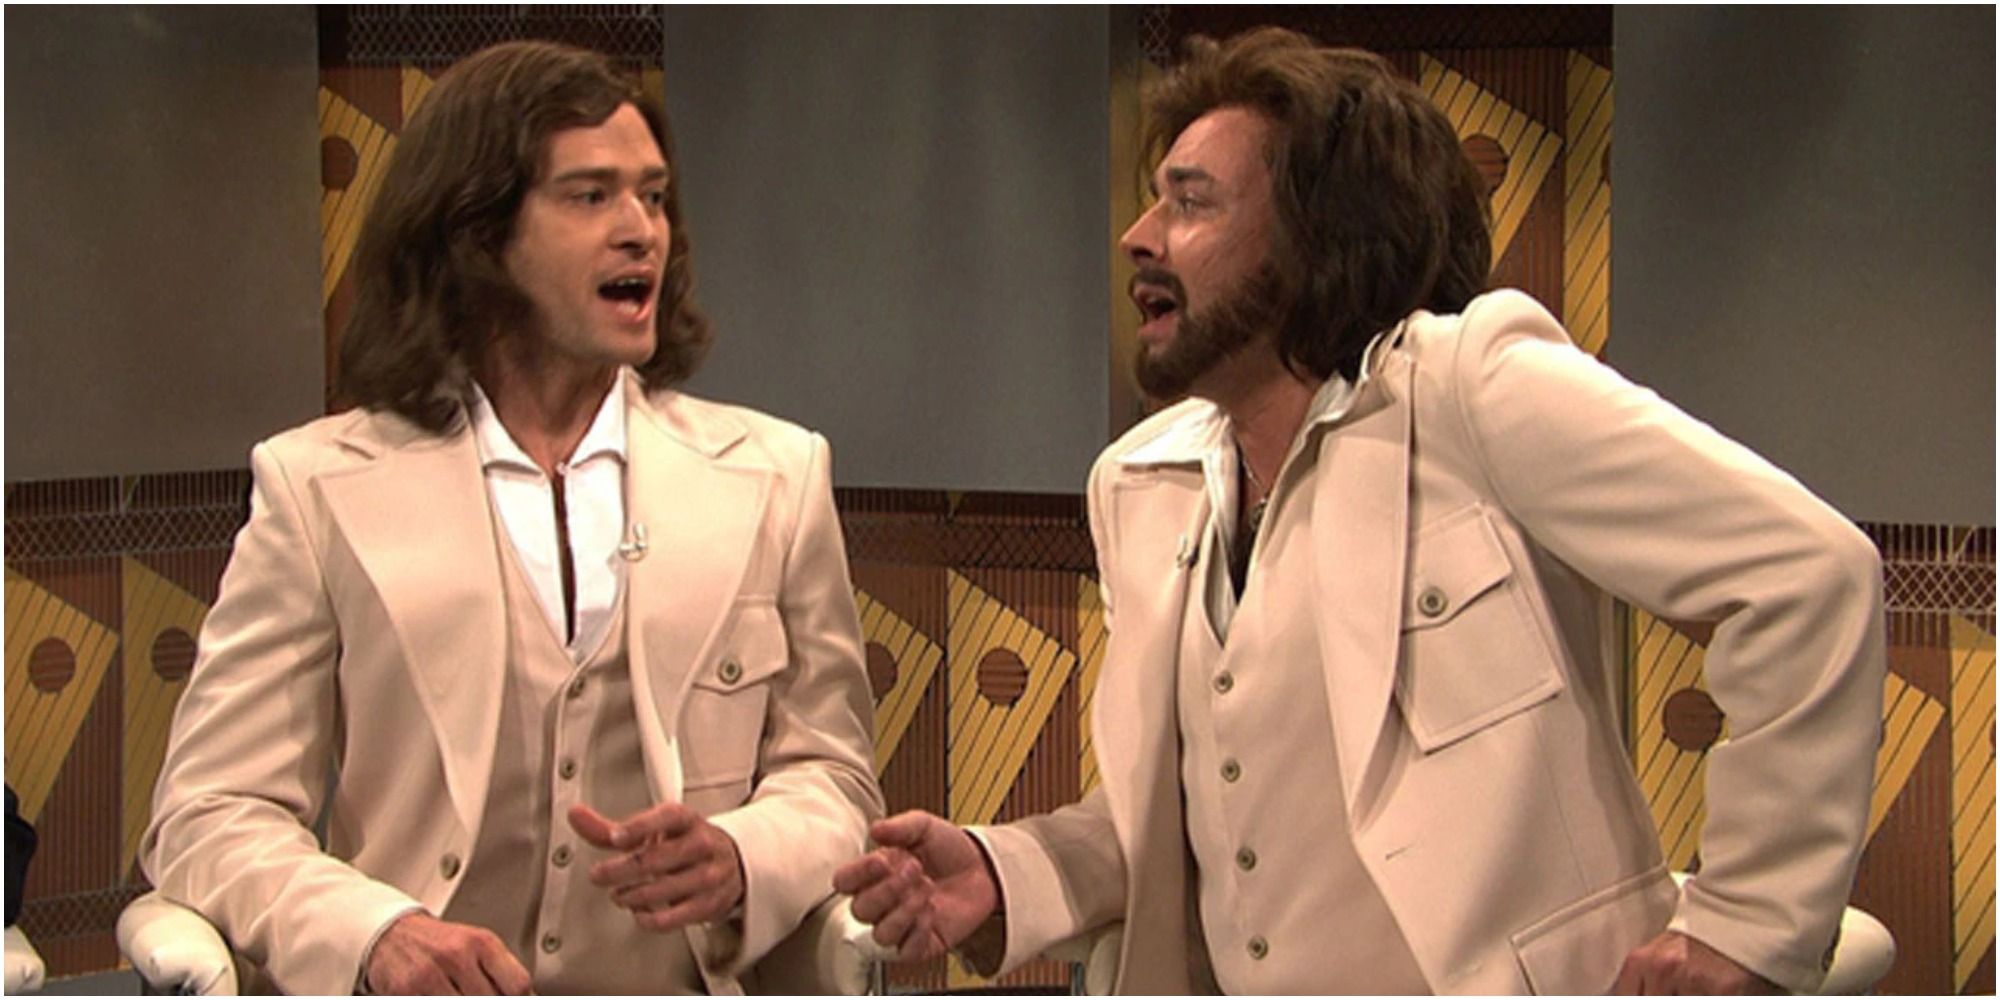 A screenshot of Justin Timberlake's Robin Gibb and Jimmy Fallon's Barry Gibb synchronizing during &quot;The Barry Gibb Talk Show&quot; sketchin Saturday Night Live